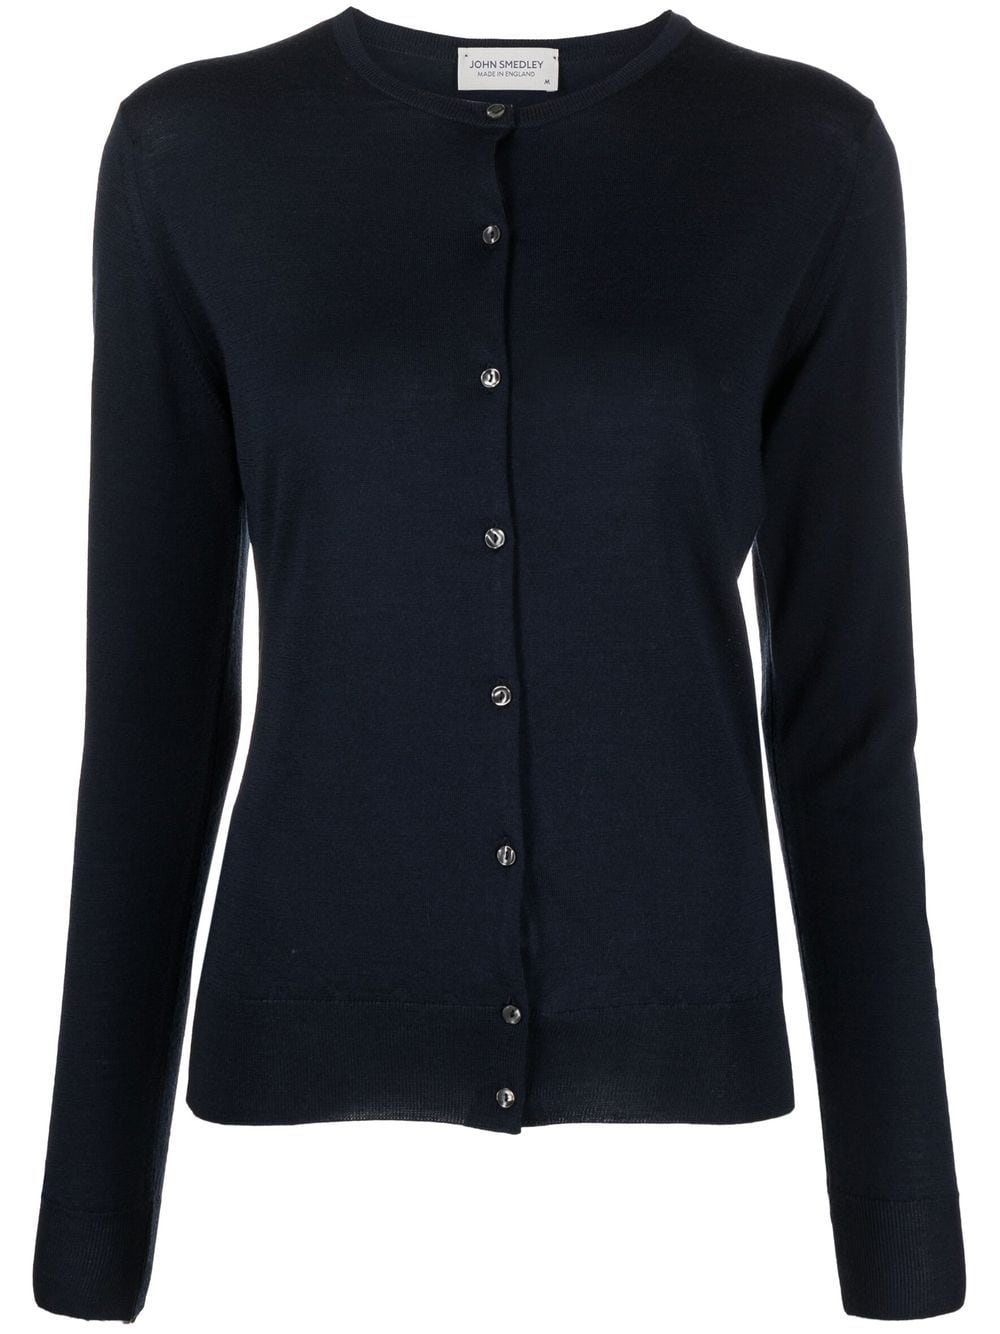 Image 1 of John Smedley Pansy button-up knitted cardigan